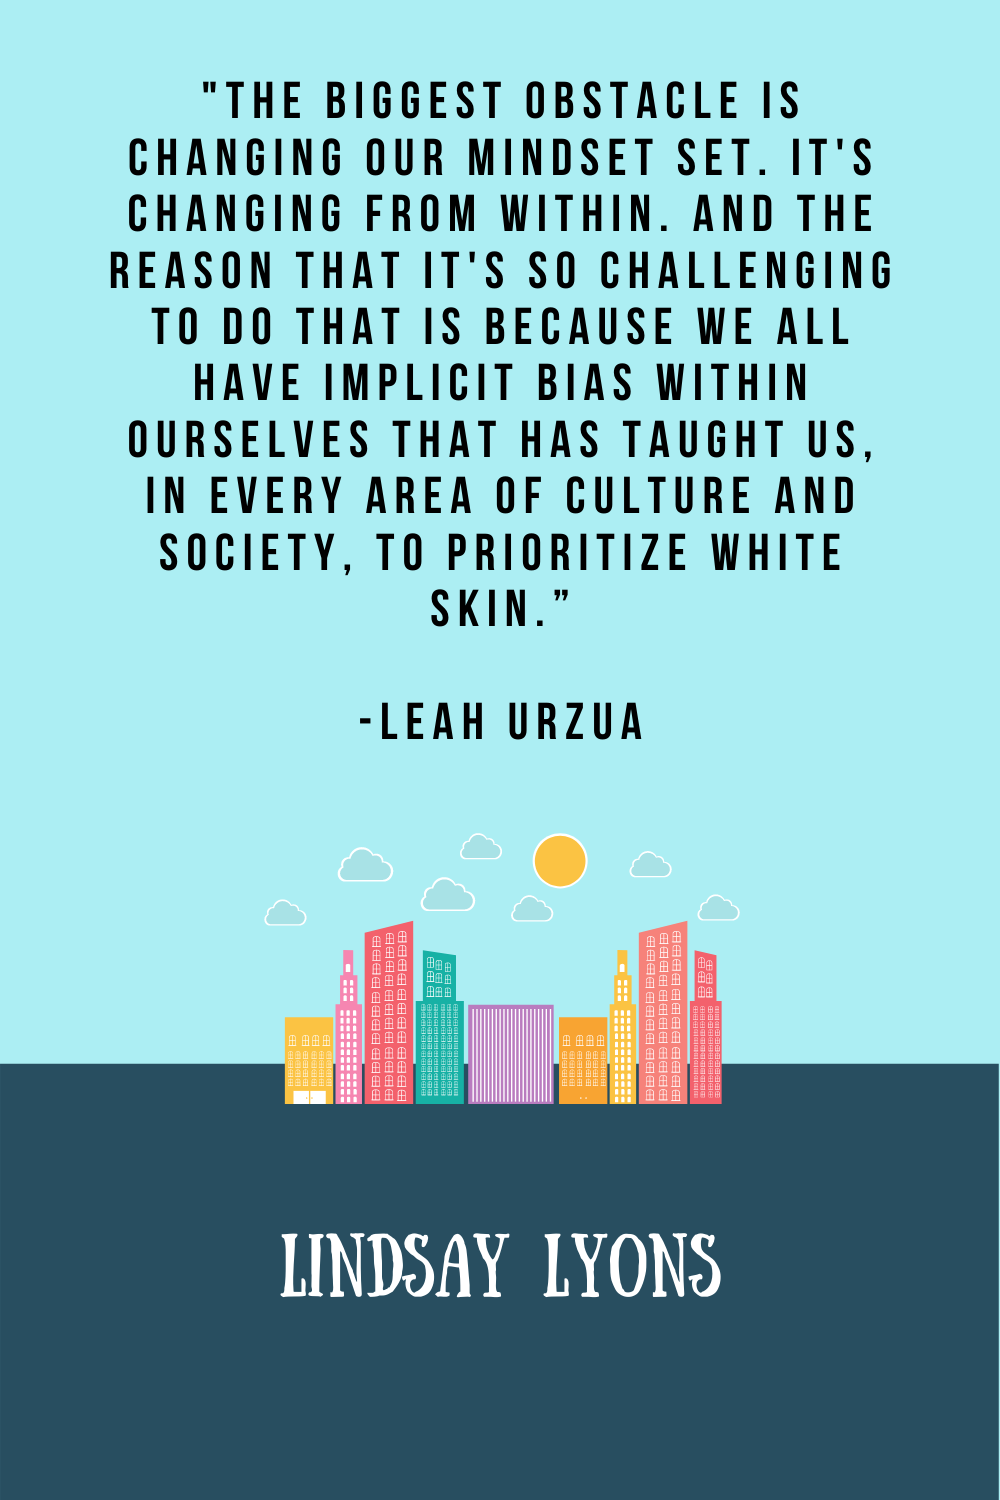 17. How to Have a Justice-Centered Business with Leah Urzua. To really have a business that centers justice, we have to ask ourselves how much effort we’re putting in to be inclusive, equitable, and anti-racist. Check out the Time for Teachership blog post for steps you can take to invite justice in your business and grab Leah’s helpful resource. For more tips on educational equity, sign up for weekly emails at bit.ly/lindsayletter